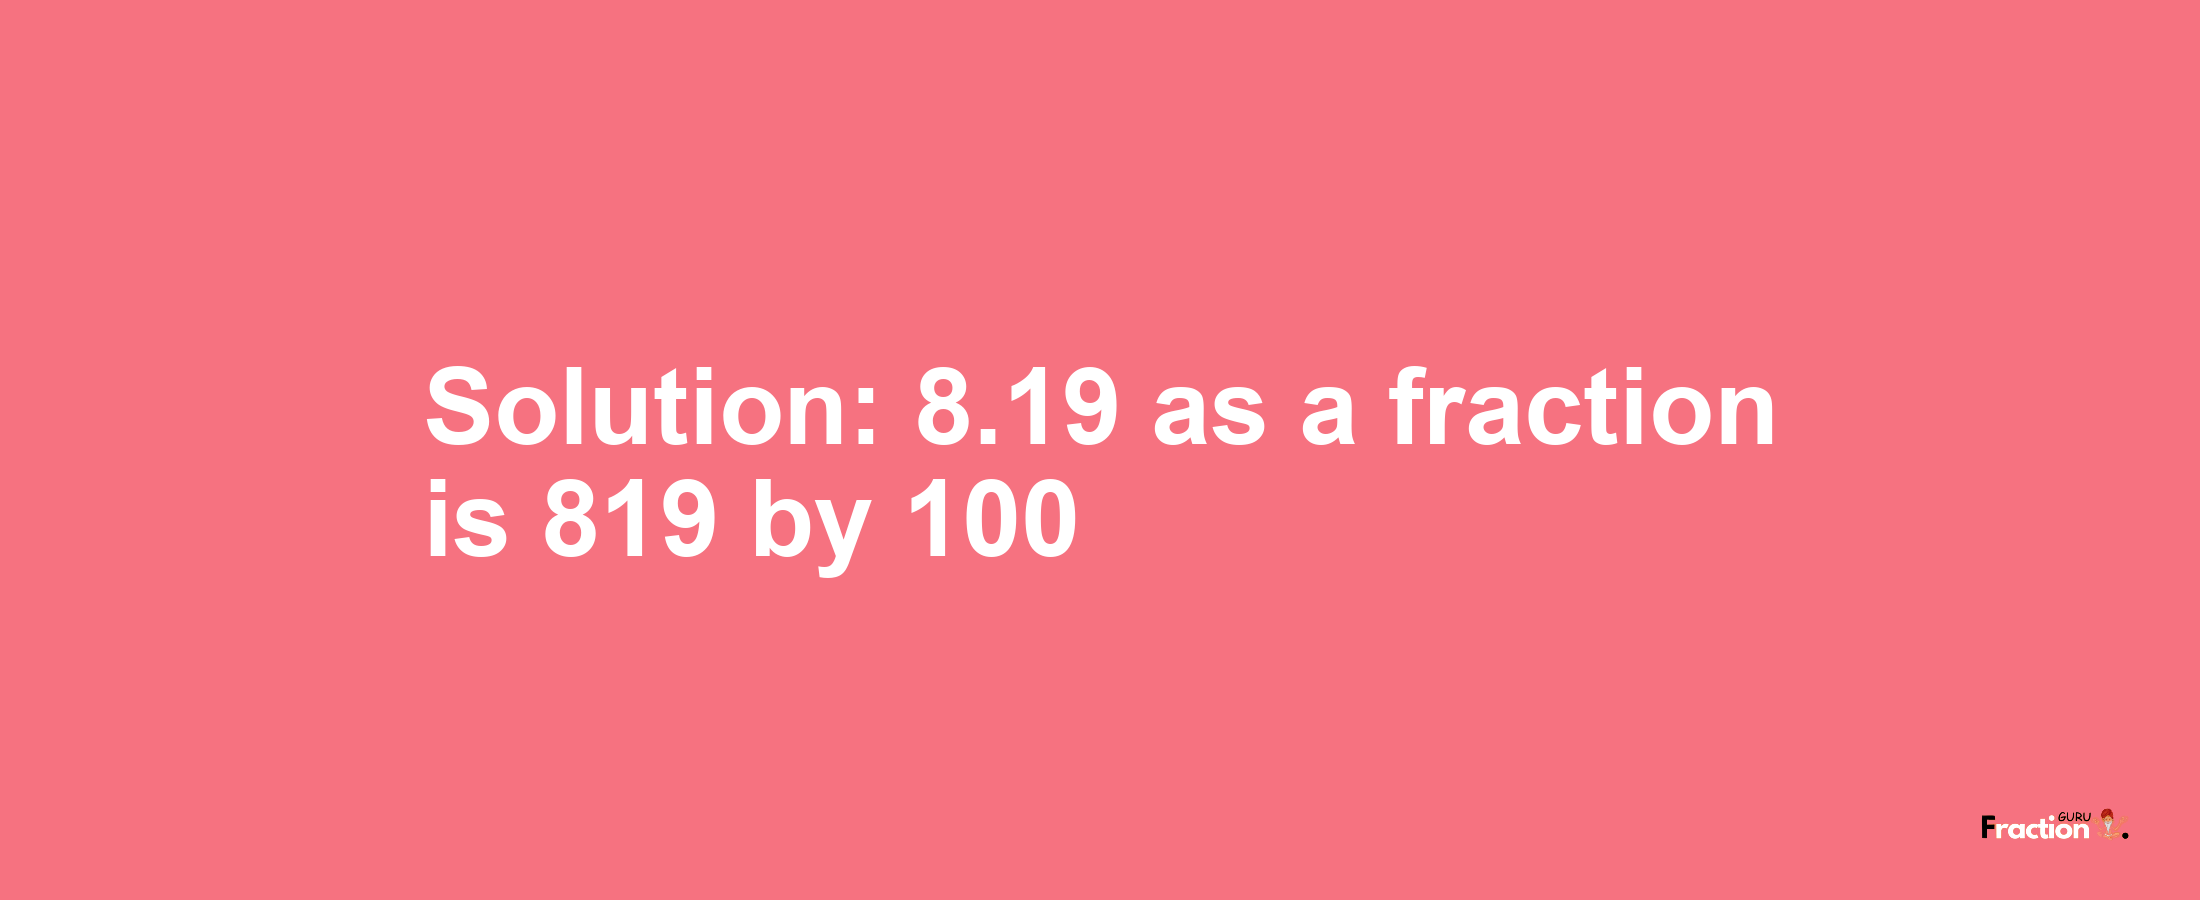 Solution:8.19 as a fraction is 819/100